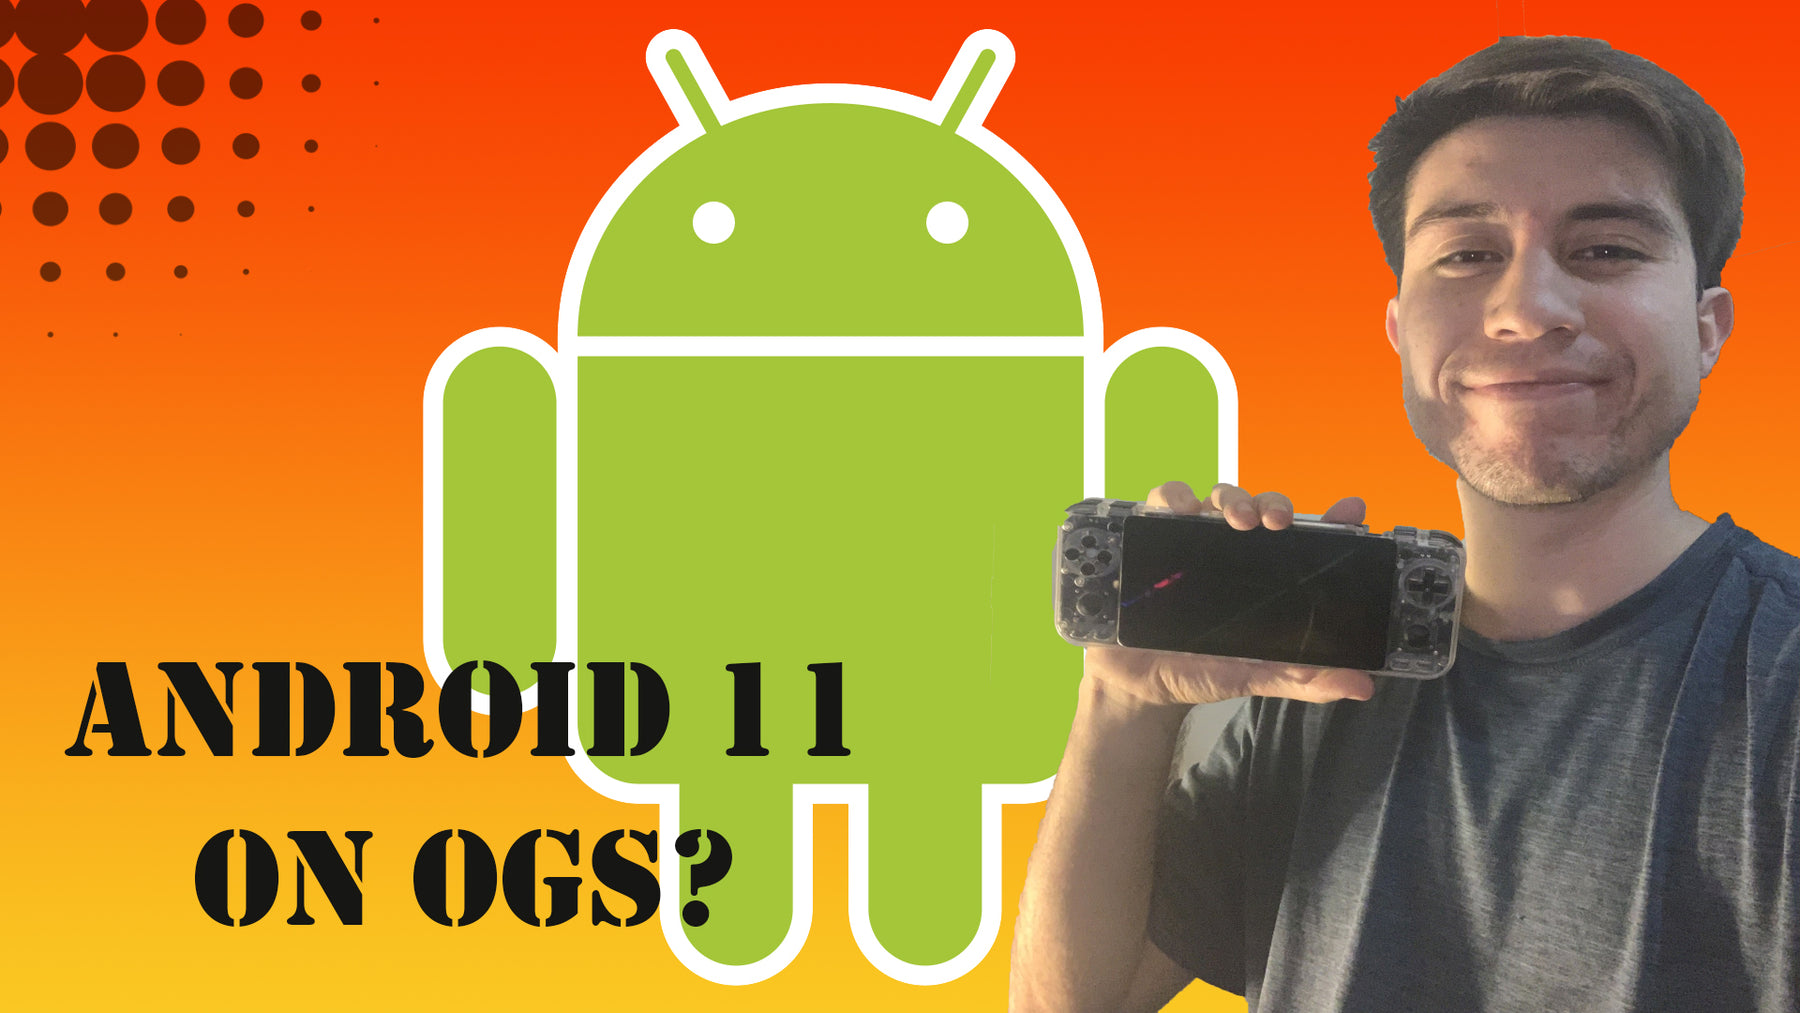 How-To: Installing Android 11 on ODROID-GO Super